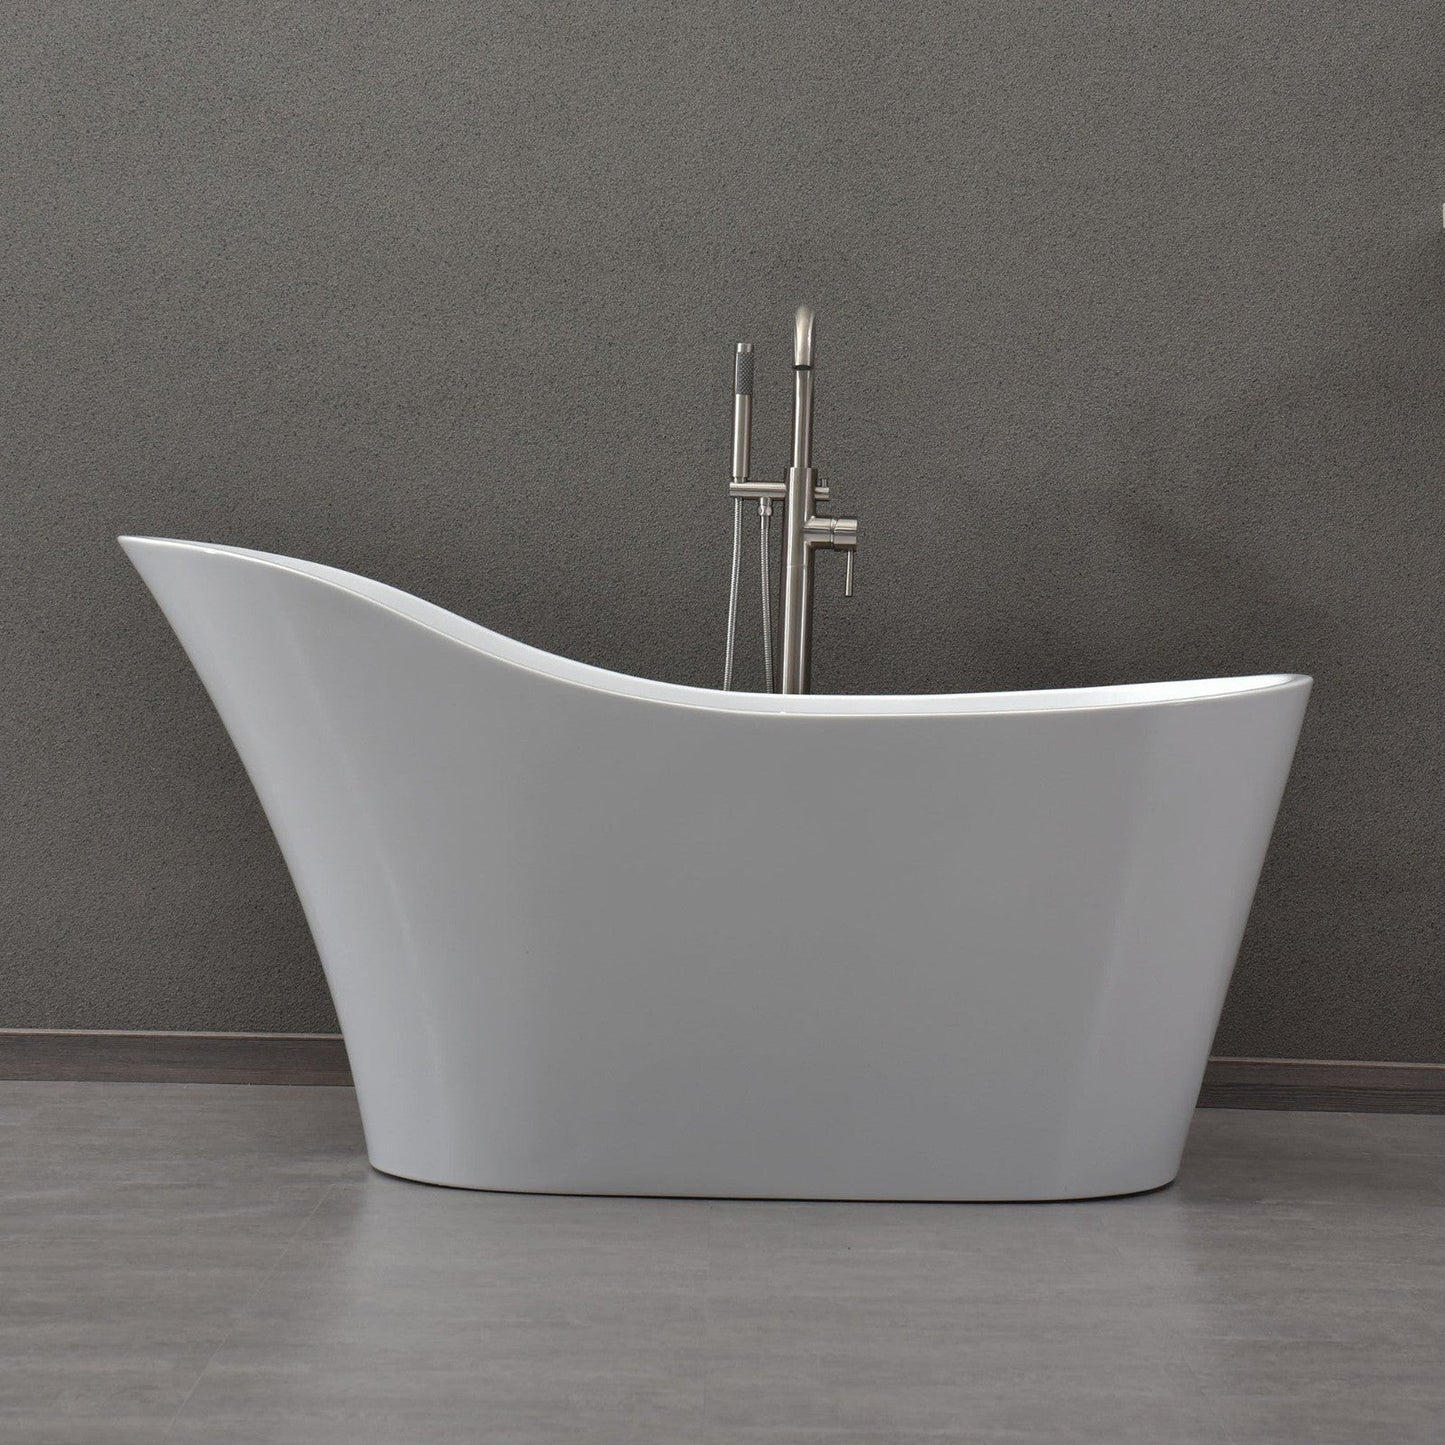 WoodBridge B0029 59" White Acrylic Freestanding Soaking Bathtub With Brushed Nickel Drain, Overflow, F0070BNVT Tub Filler and Caddy Tray